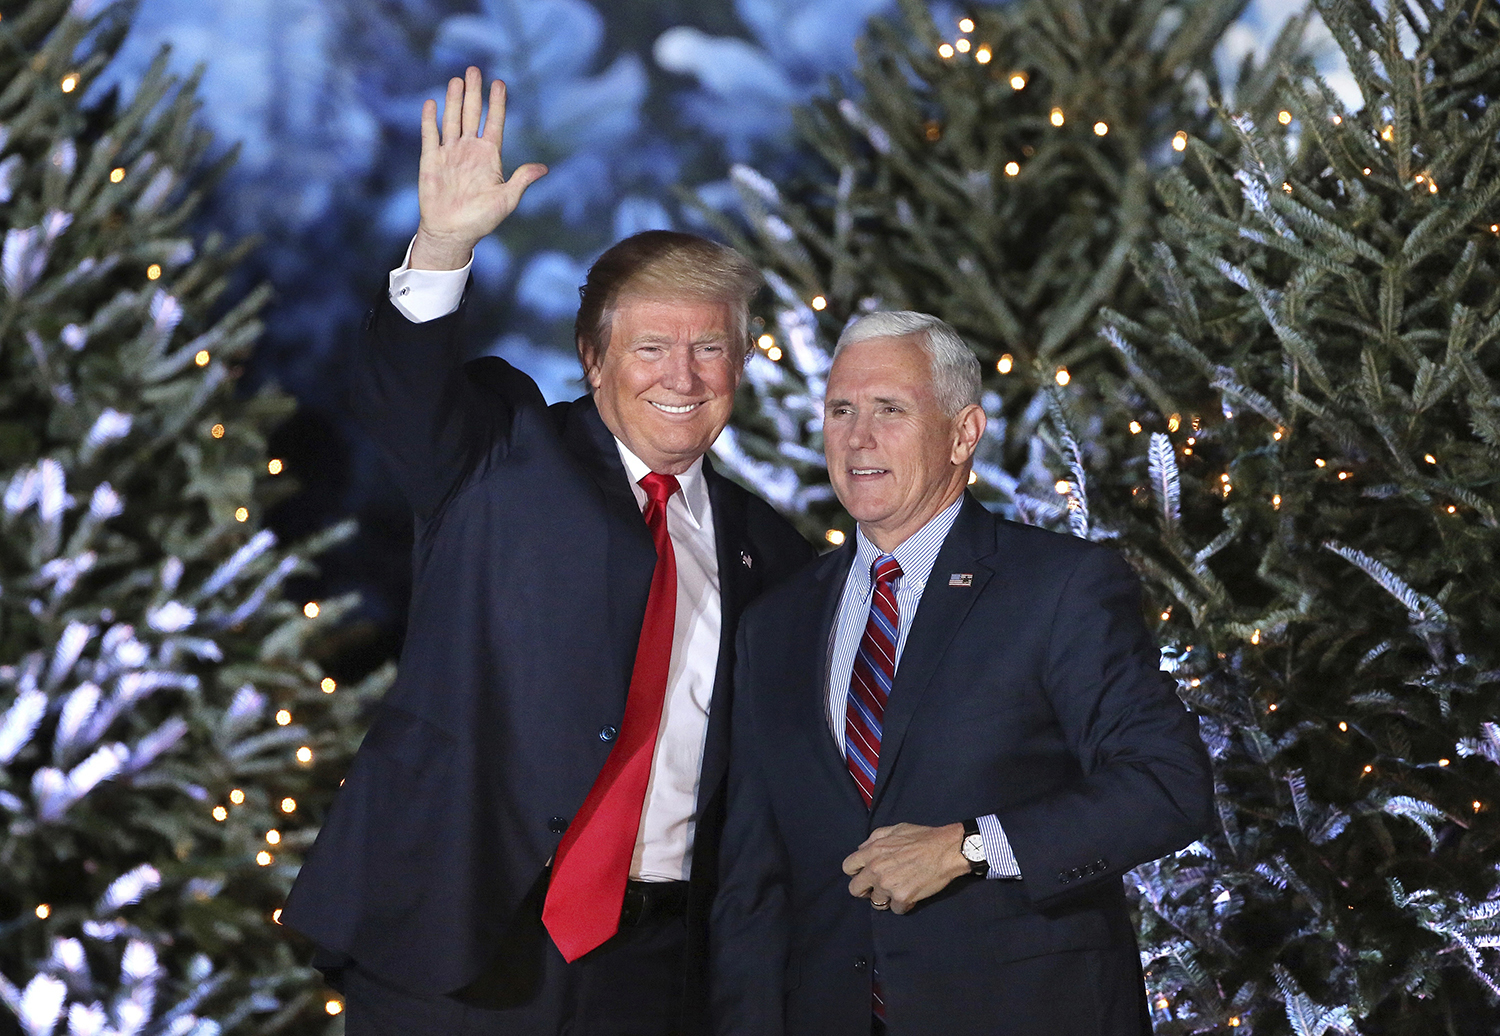 President-elect Donald Trump takes the stage with Vice President-elect Mike Pence during a rally in Orlando, Fla., Friday night, Dec. 16, 2016. (Joe Burbank/Orlando Sentinel via AP)